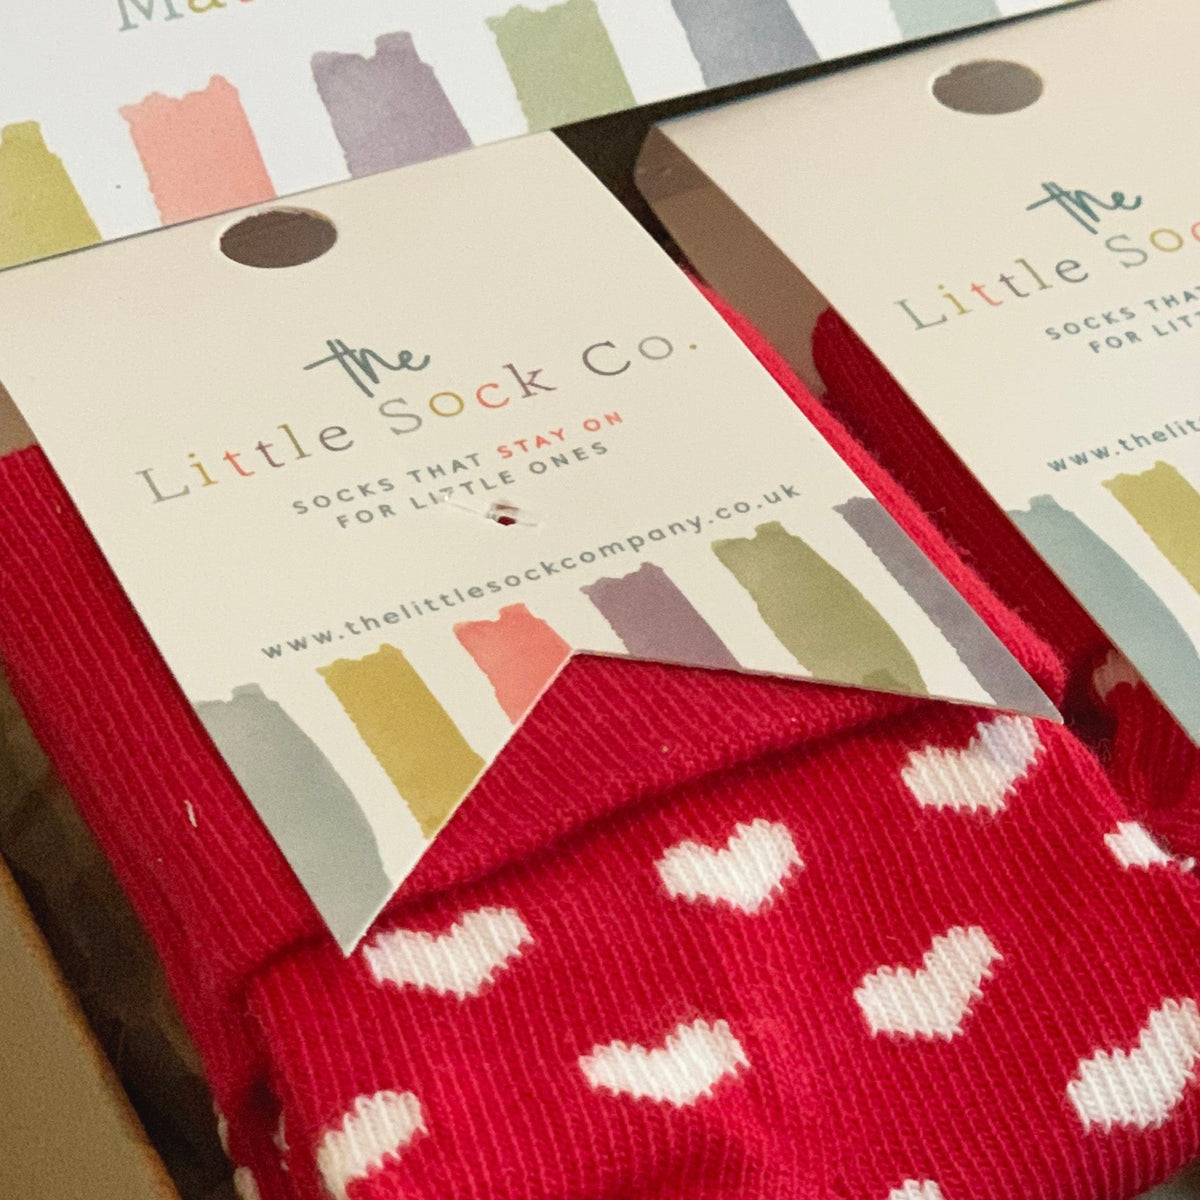 Matching Adults Socks Gift Set in Red Hearts ♥️ Perfect Valentine's Day Gift